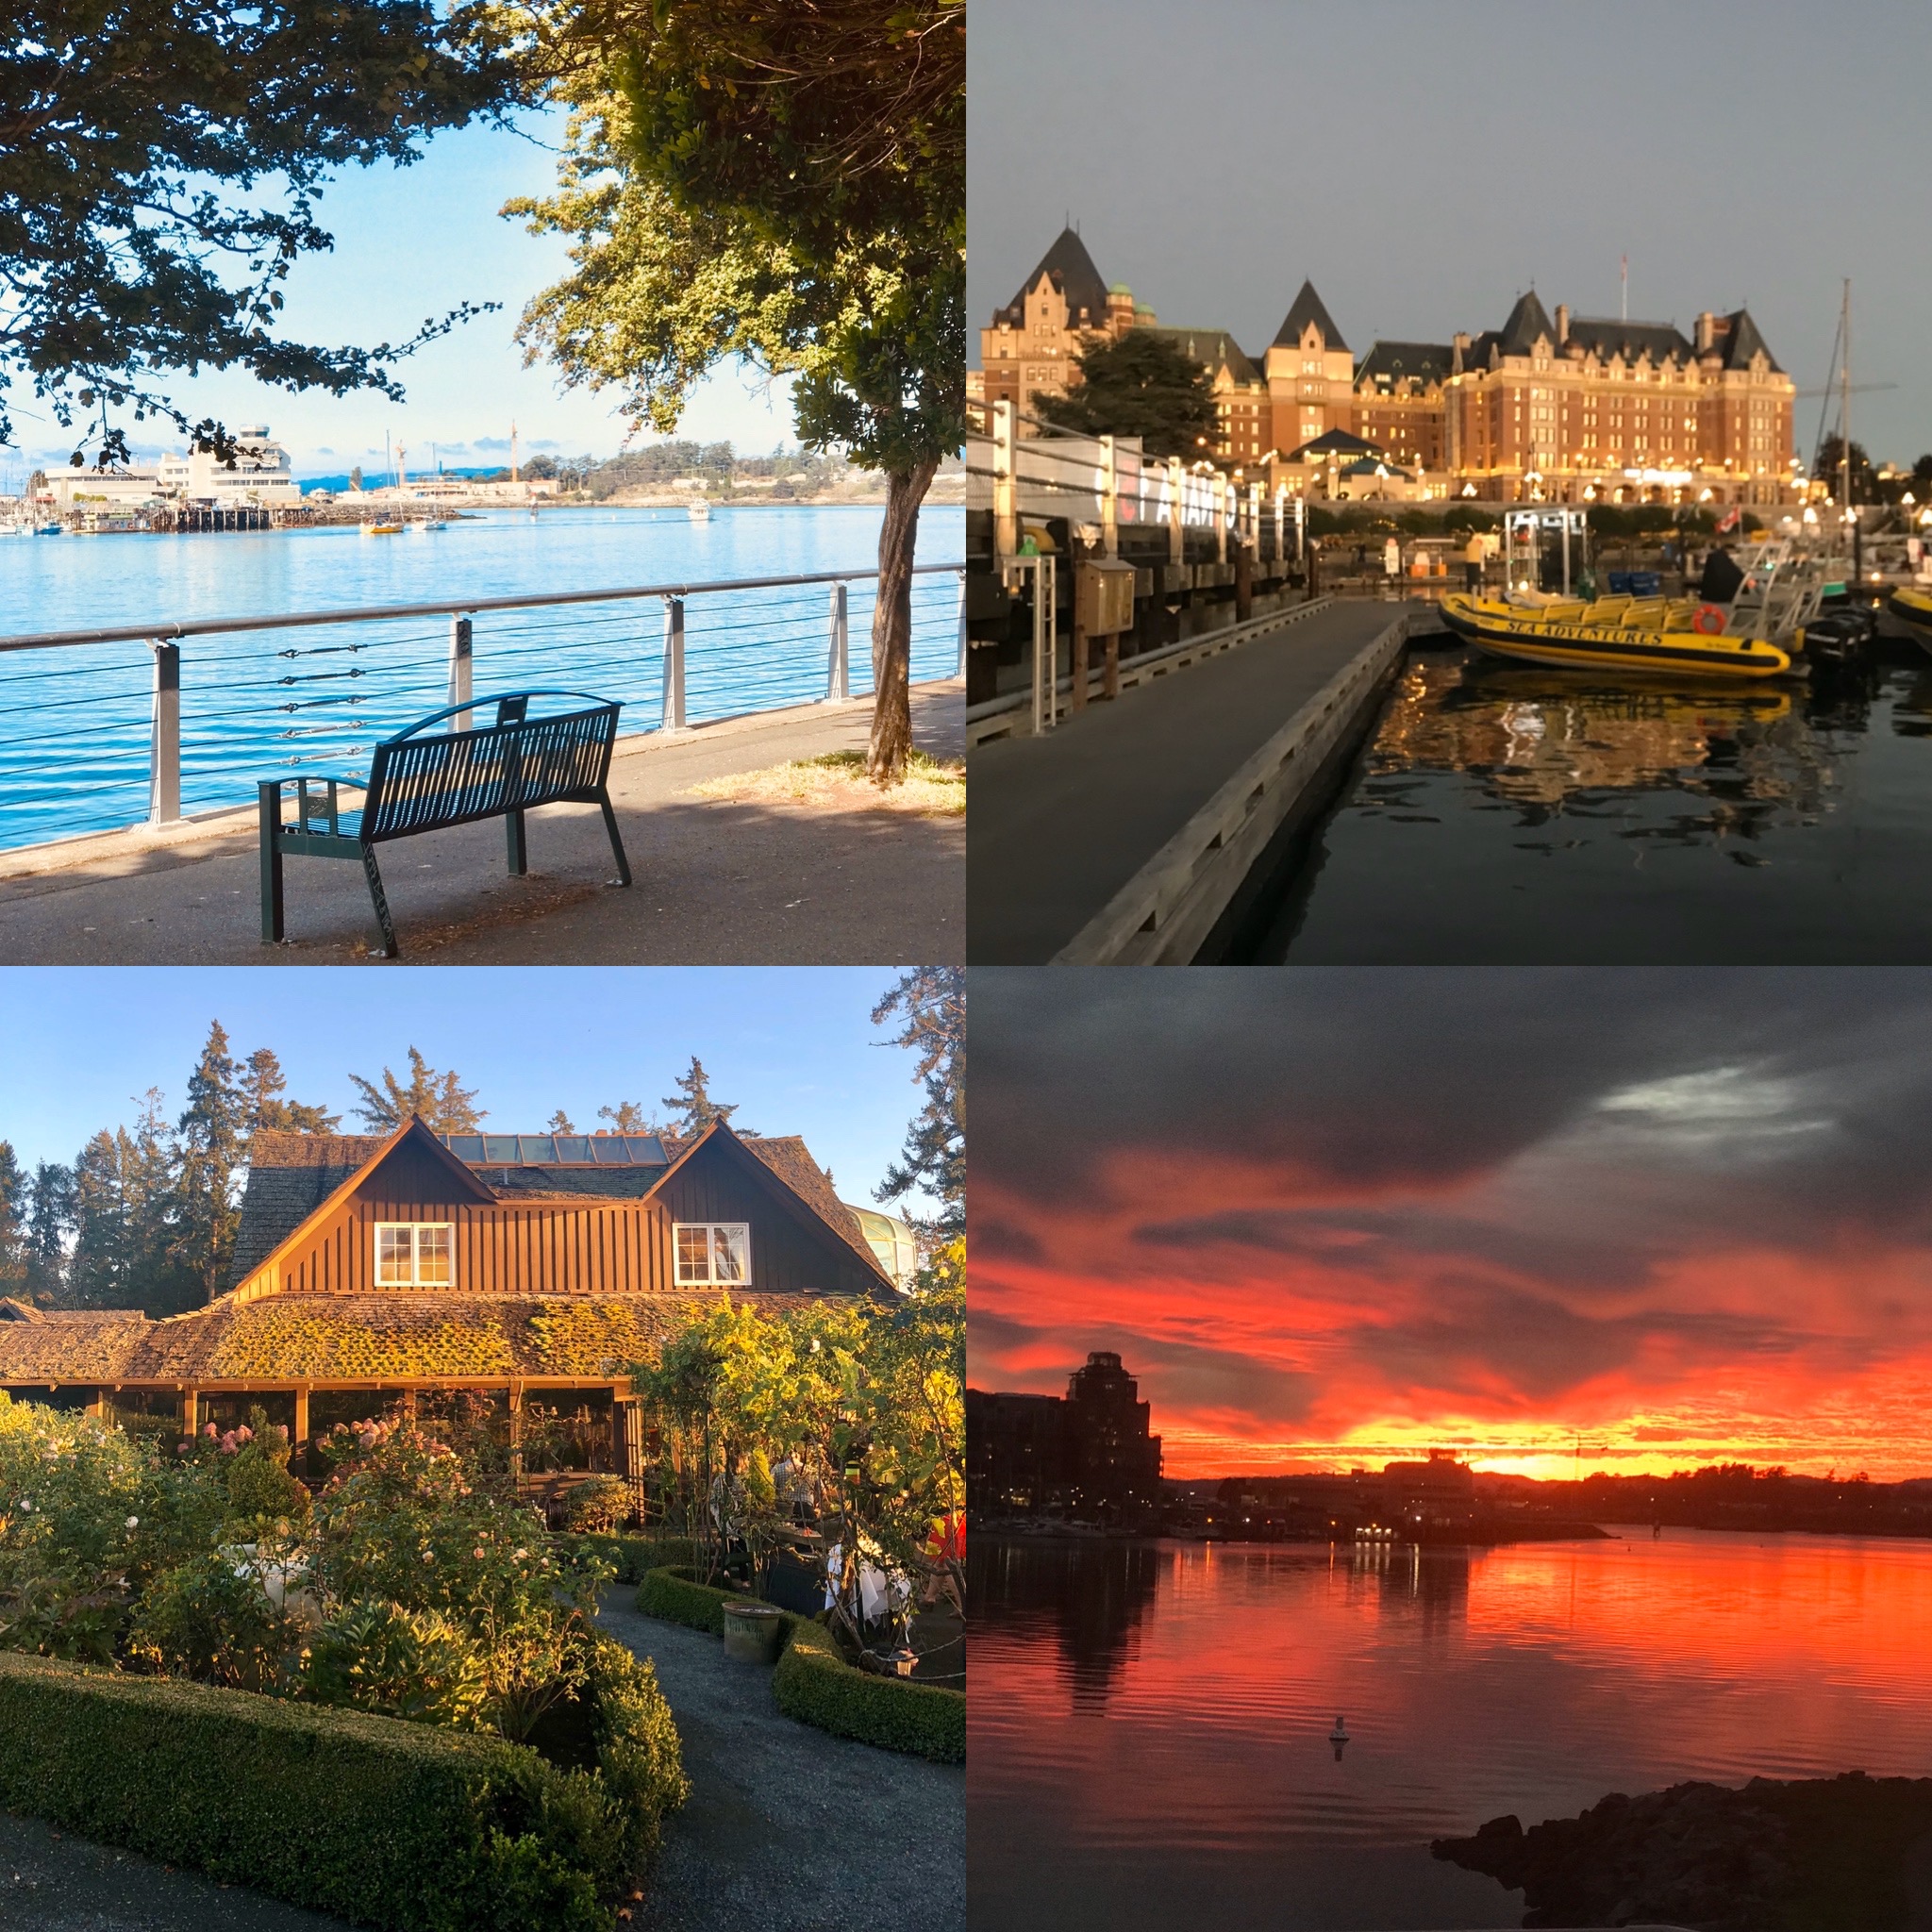 Victoria Vancouver Island One of CNN Travel's Best Places to Visit in 2020